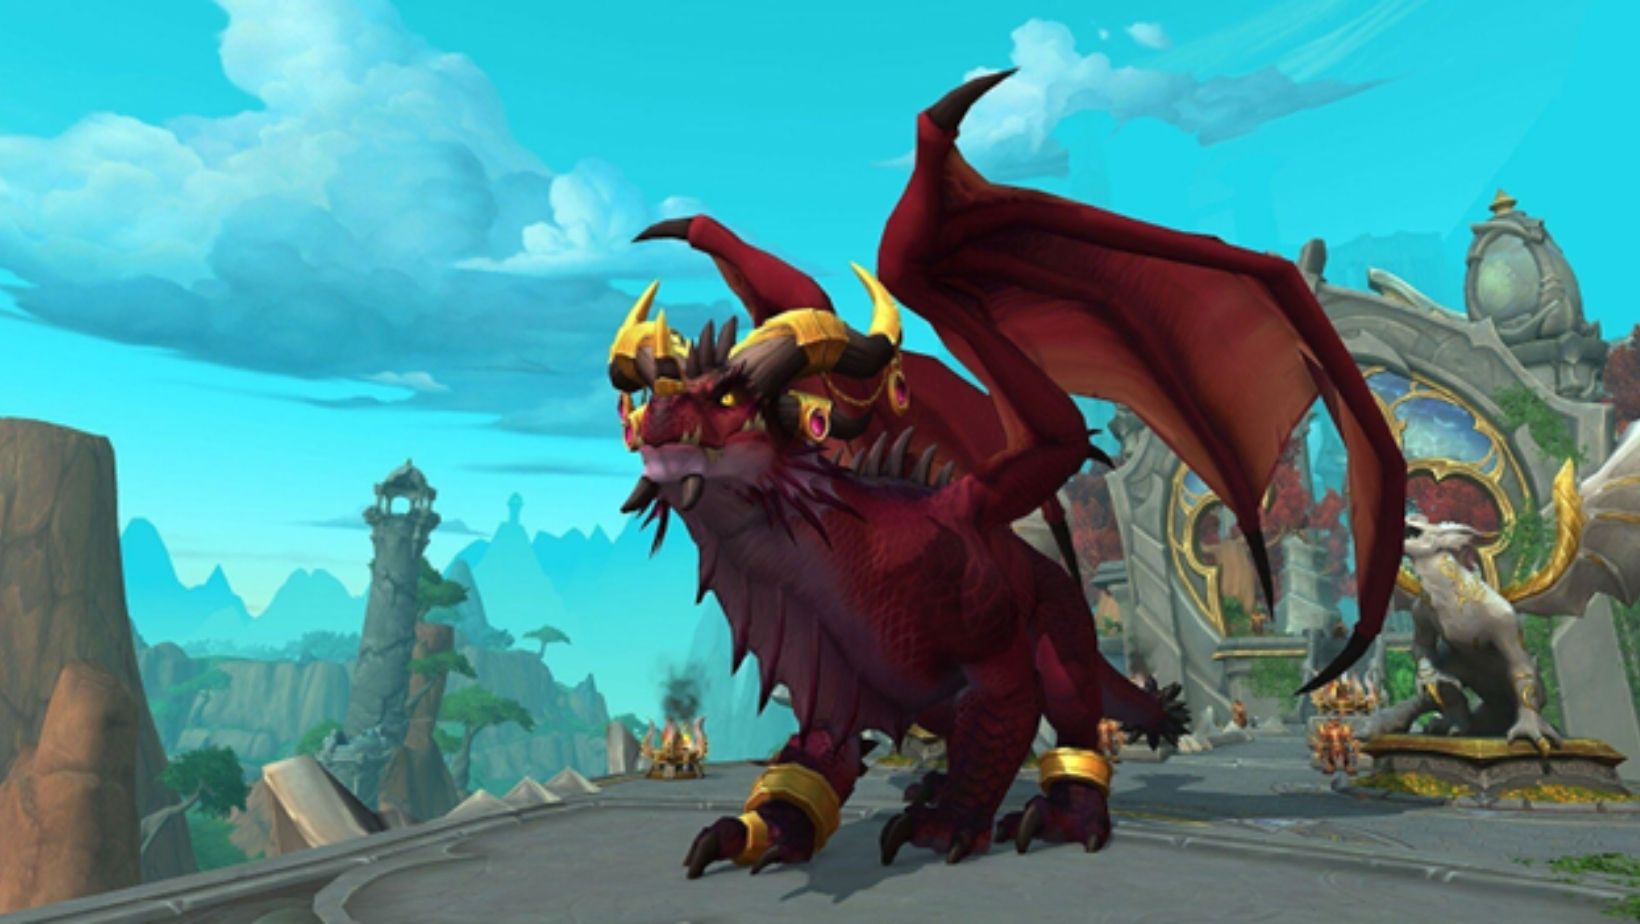 Arlee in Azeroth: The Quest for Dragonflight in WoW